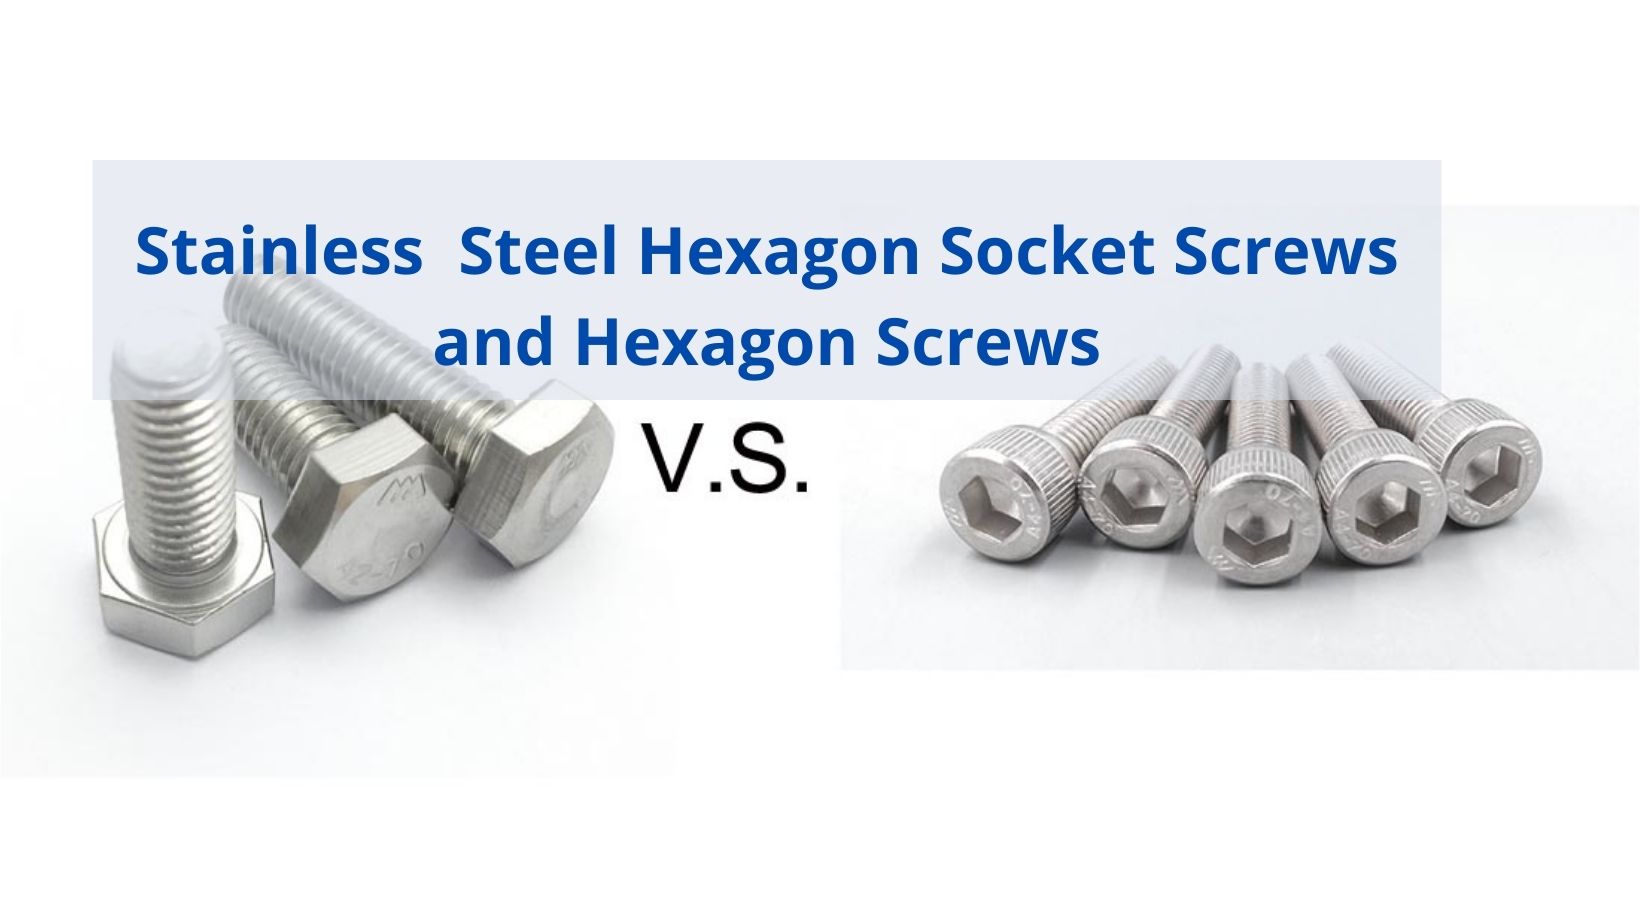 What is the Difference Between Stainless Steel Hexagon Socket Screws and Hexagon Screws